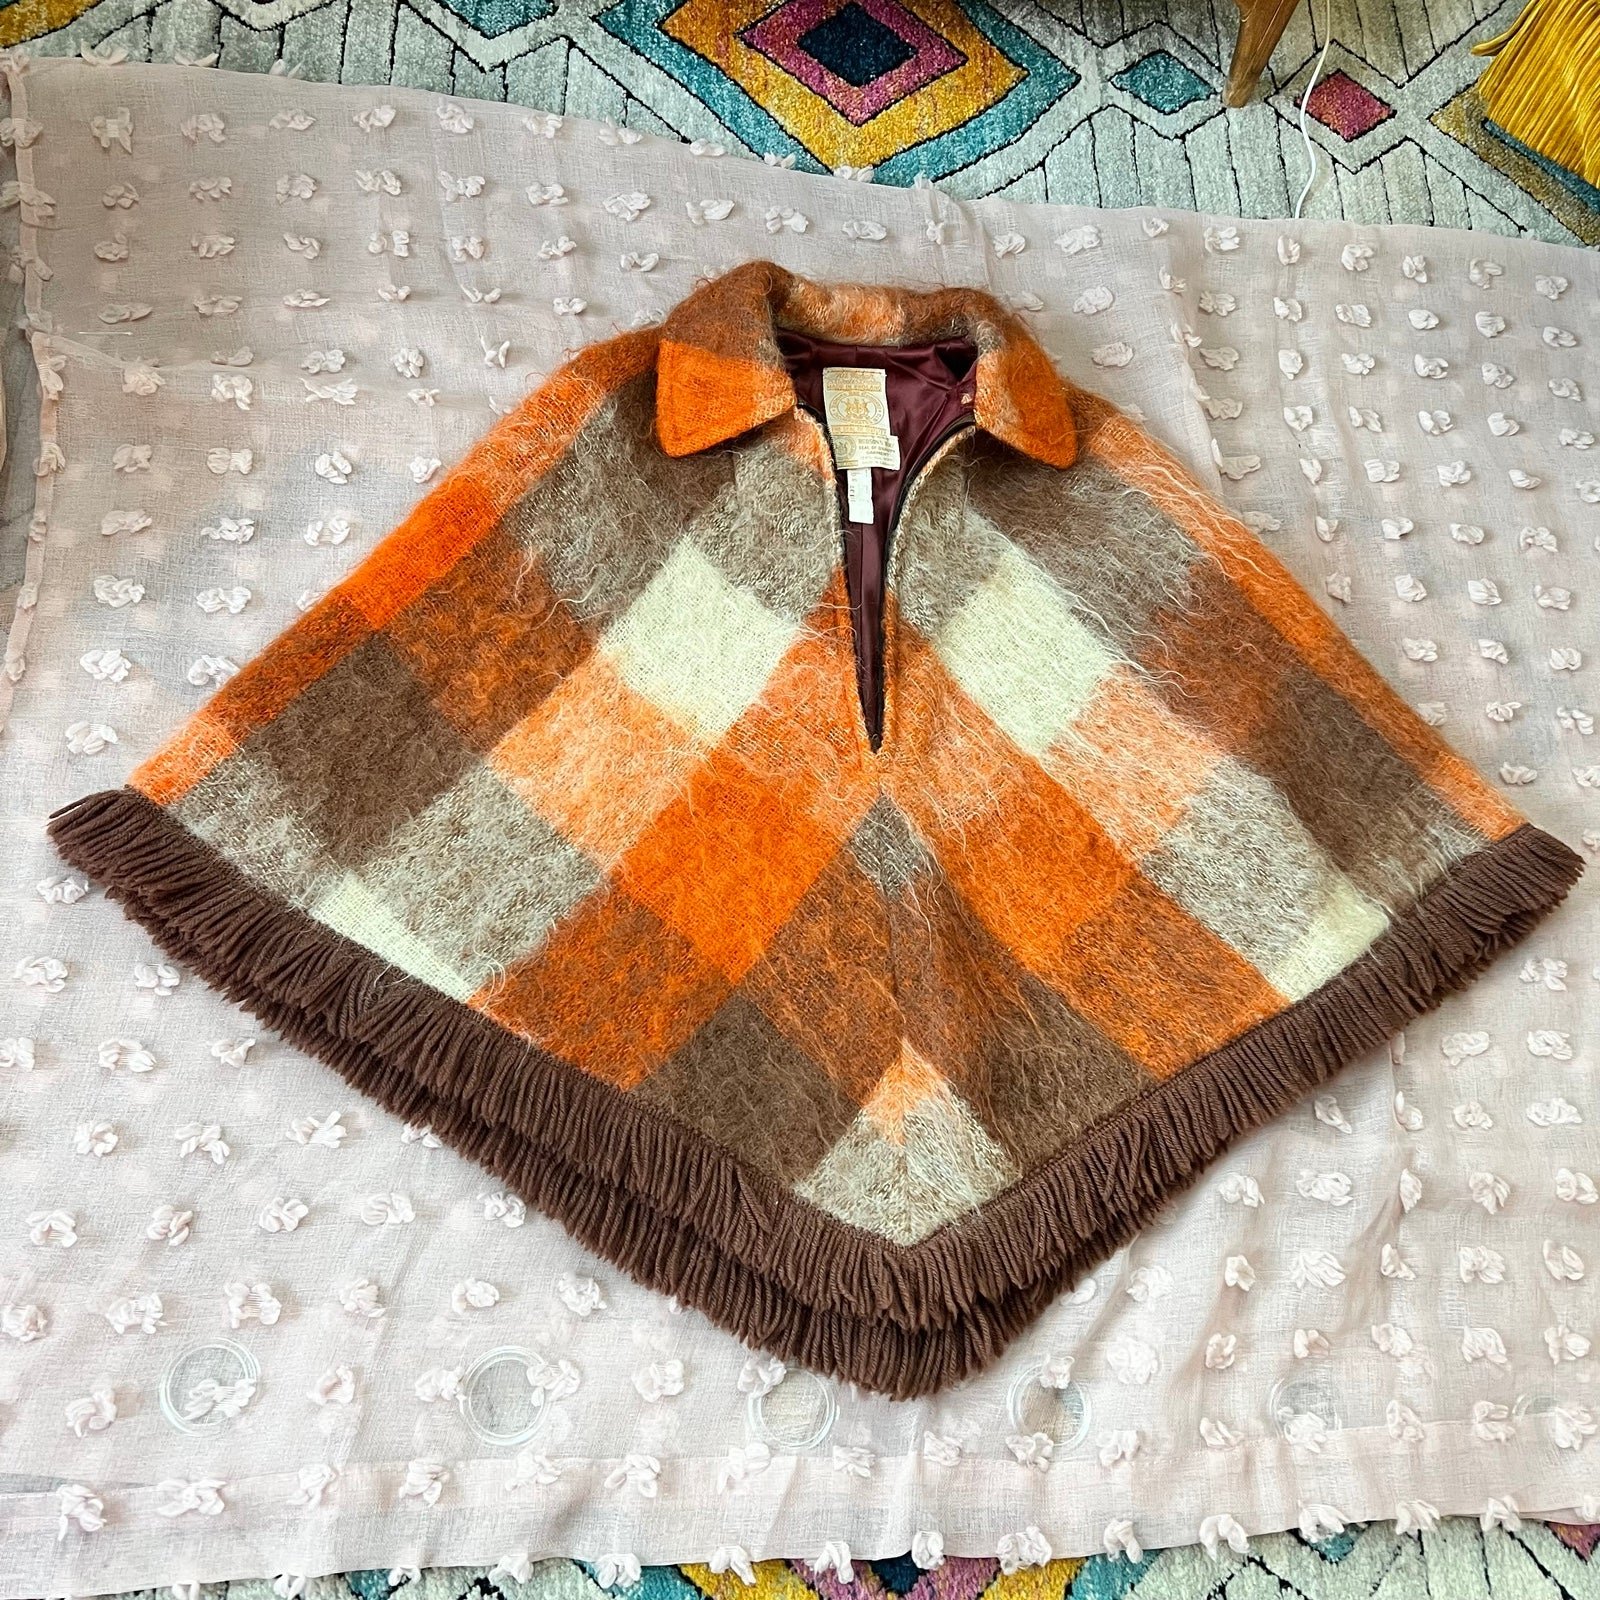 Popular Hudson Bay vintage mohair poncho/ cape 1970s p8nCtXwOy New Style